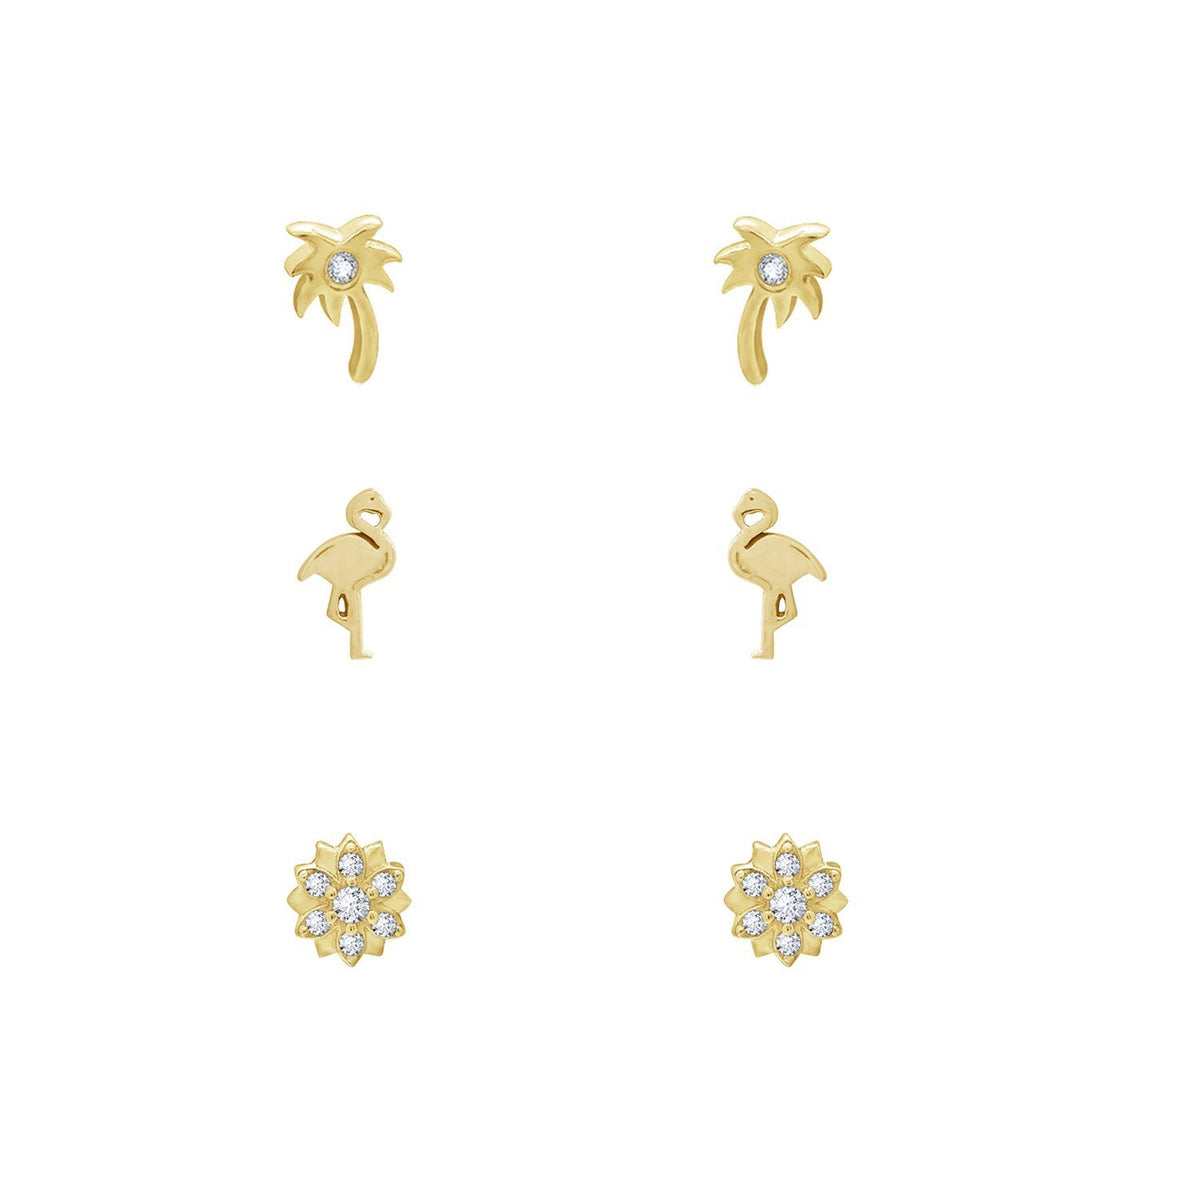 GEMOUR 14K Yellow Gold Clad Sterling Silver Cubic Zirconia Summer Minimal Earring Set, Fruity Pineapple and Palm Tree, Flamingo and Flower Earrings - GEMOUR